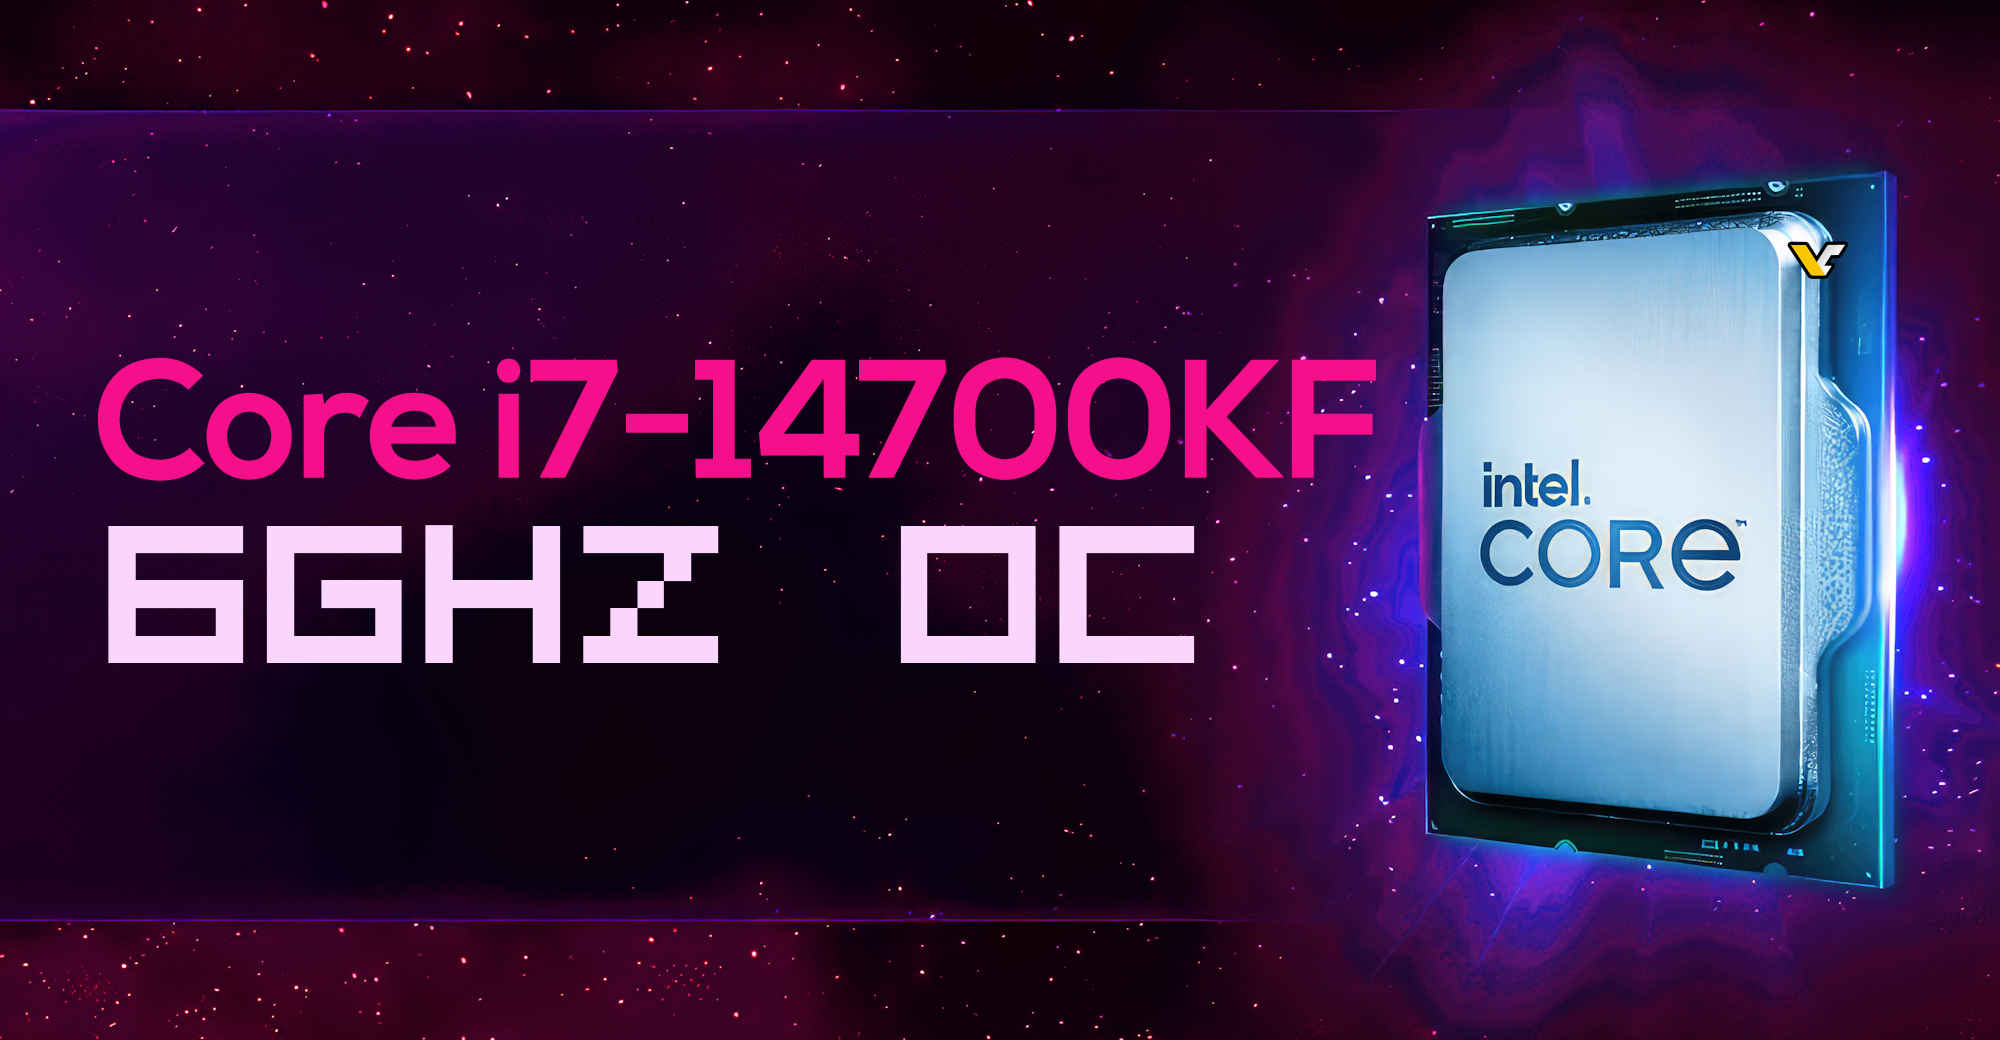 Intel's new 20-core i7-14700KF CPU spotted on Geekbench with 6.0